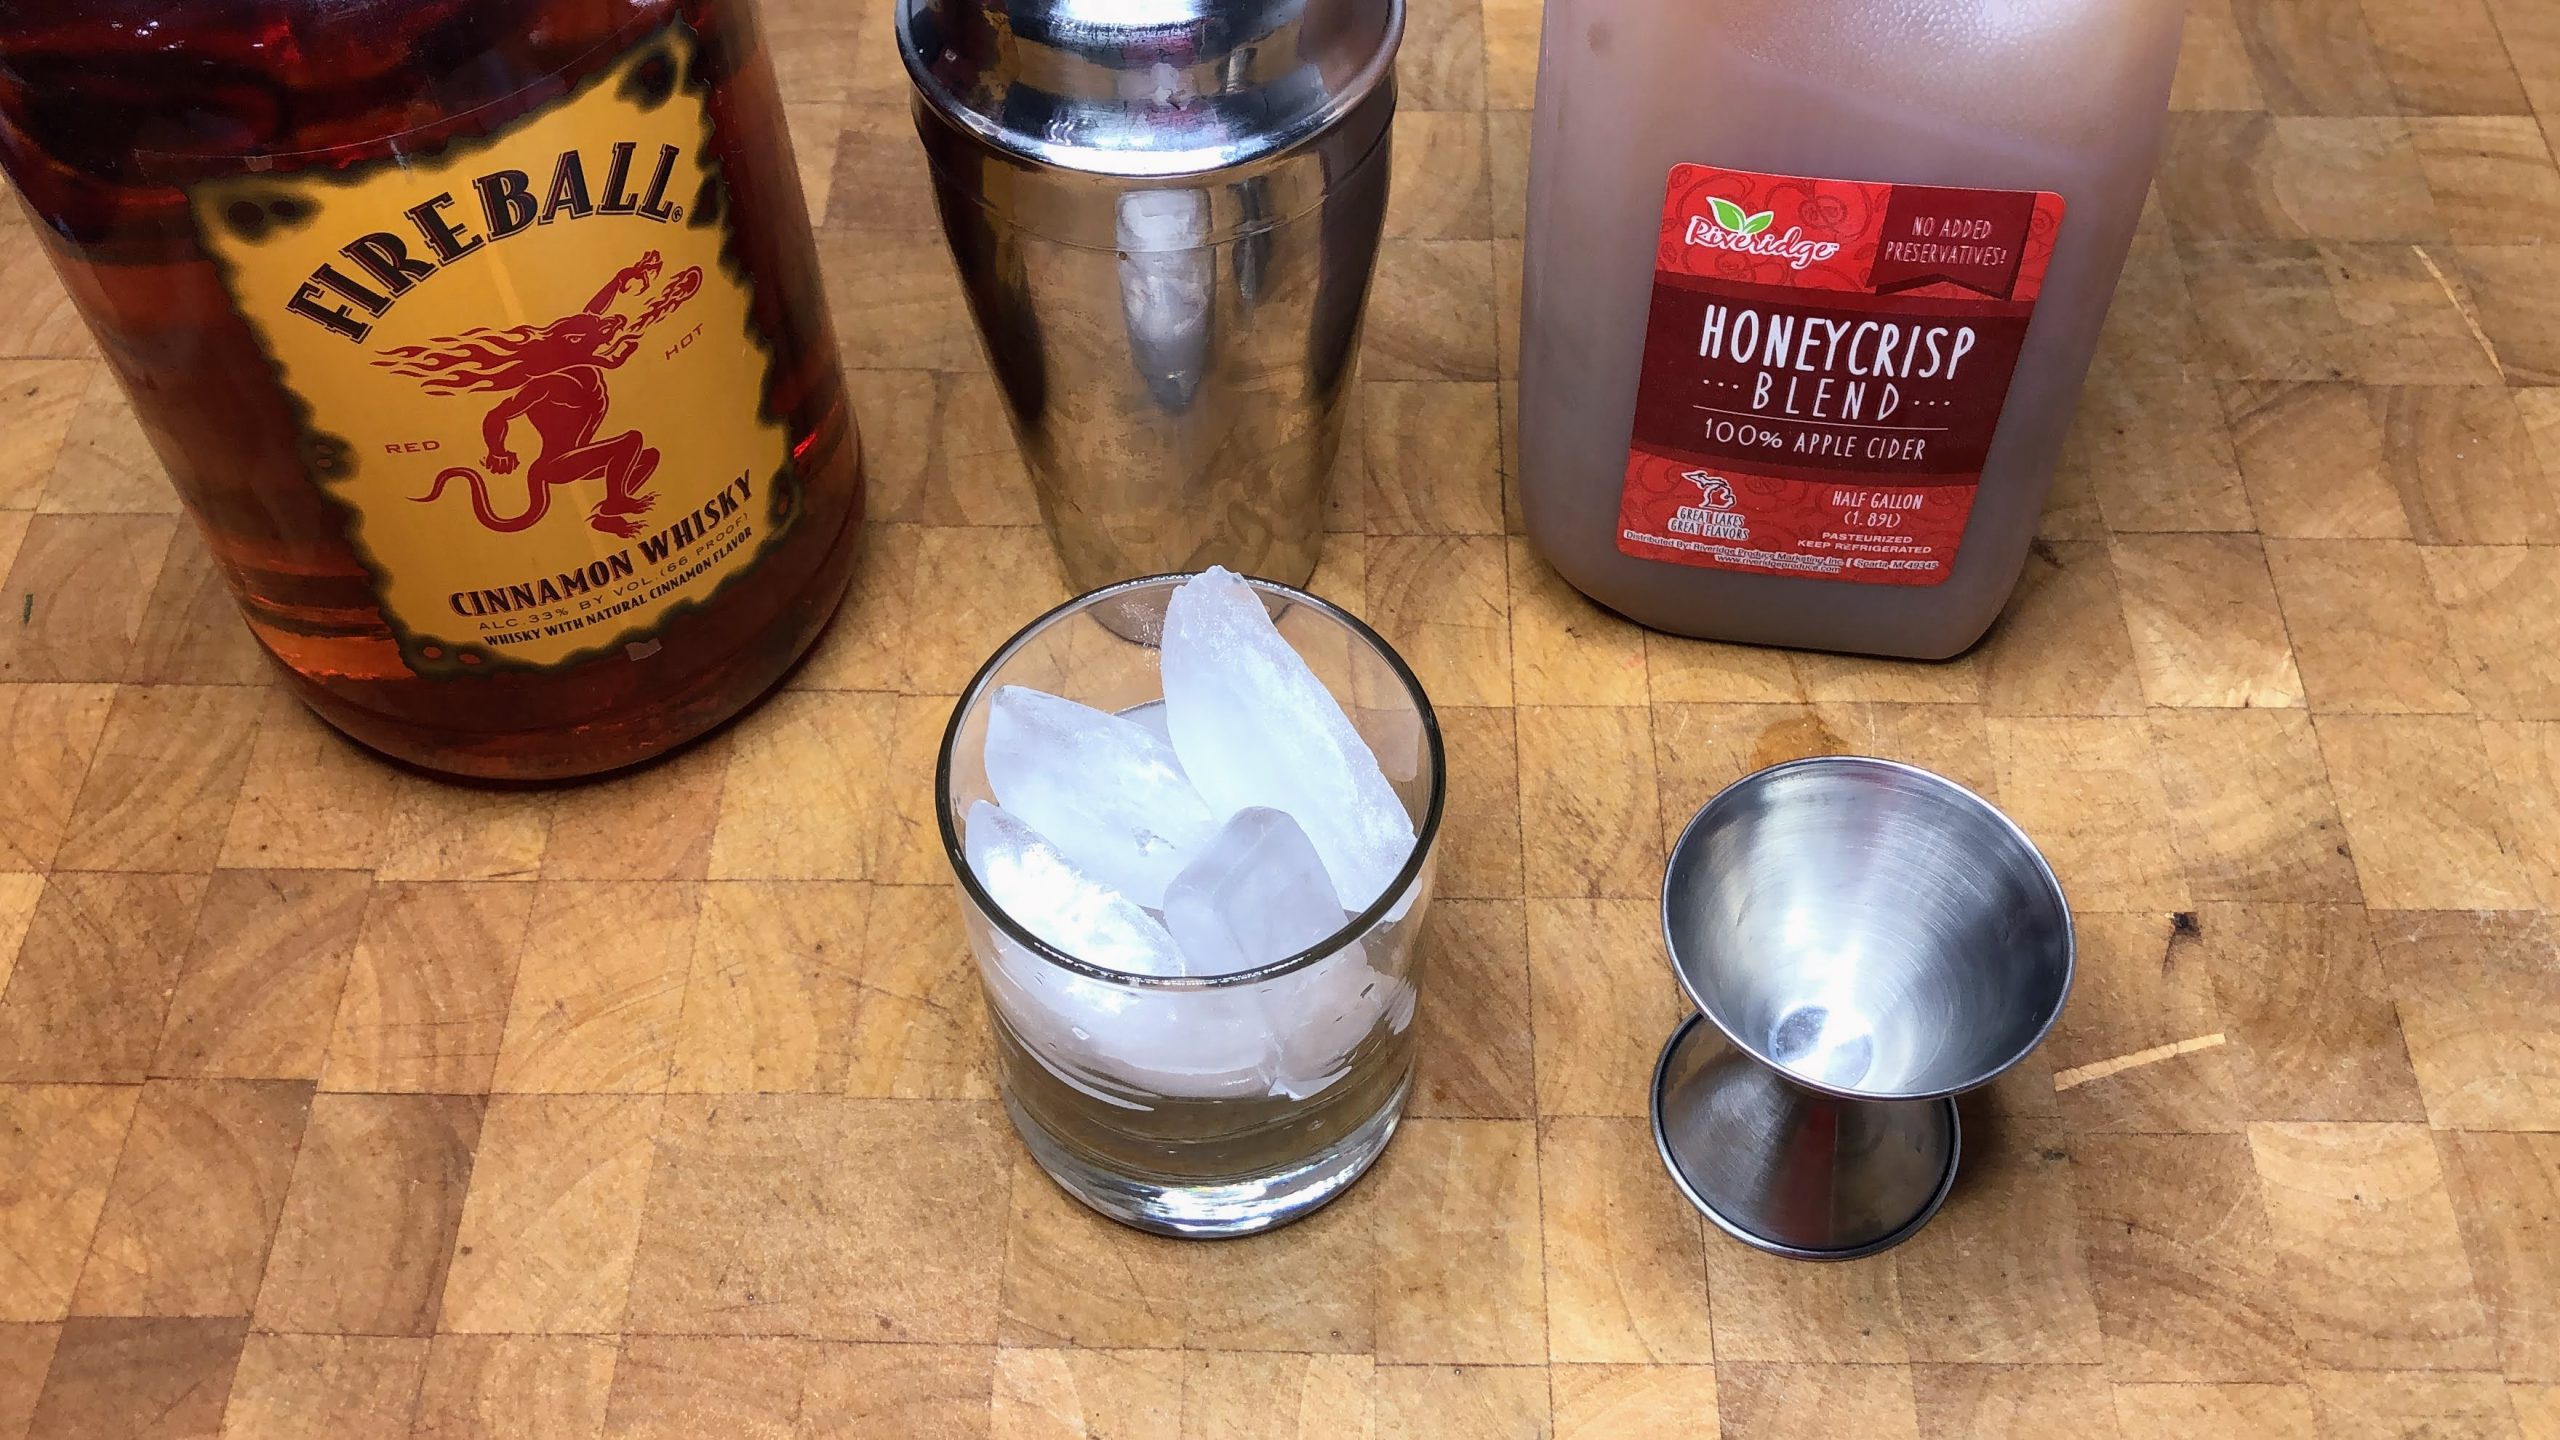 Fireball next to shaker, apple cider, rocks glass with ice and jigger.